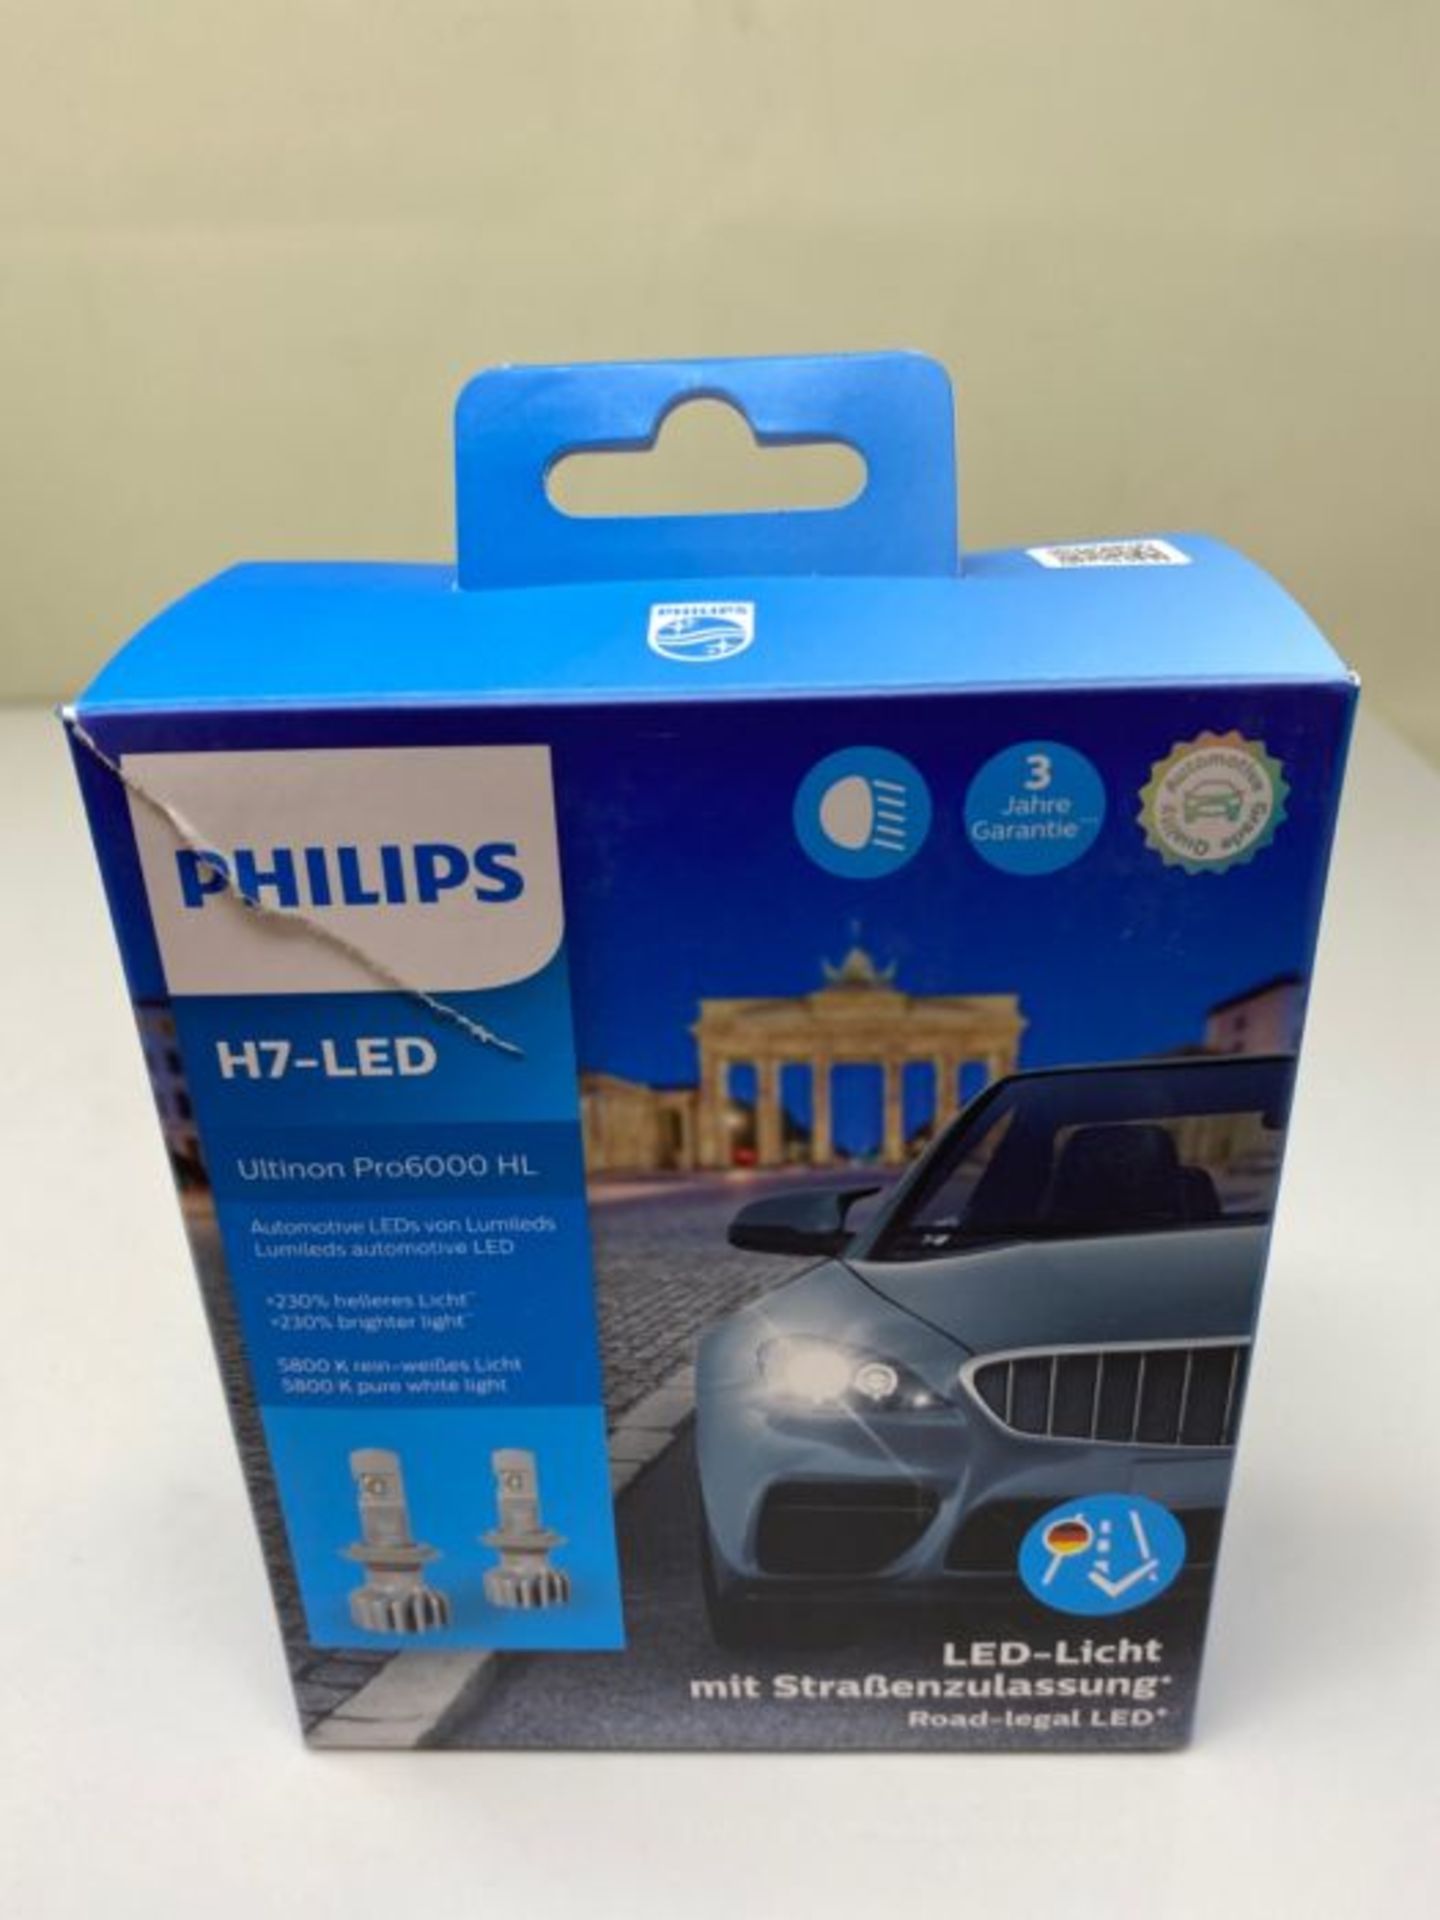 RRP £99.00 Philips Ultinon Pro6000 H7 LED Headlight Bulb Road Legal +230% Brighter Light - Image 2 of 3